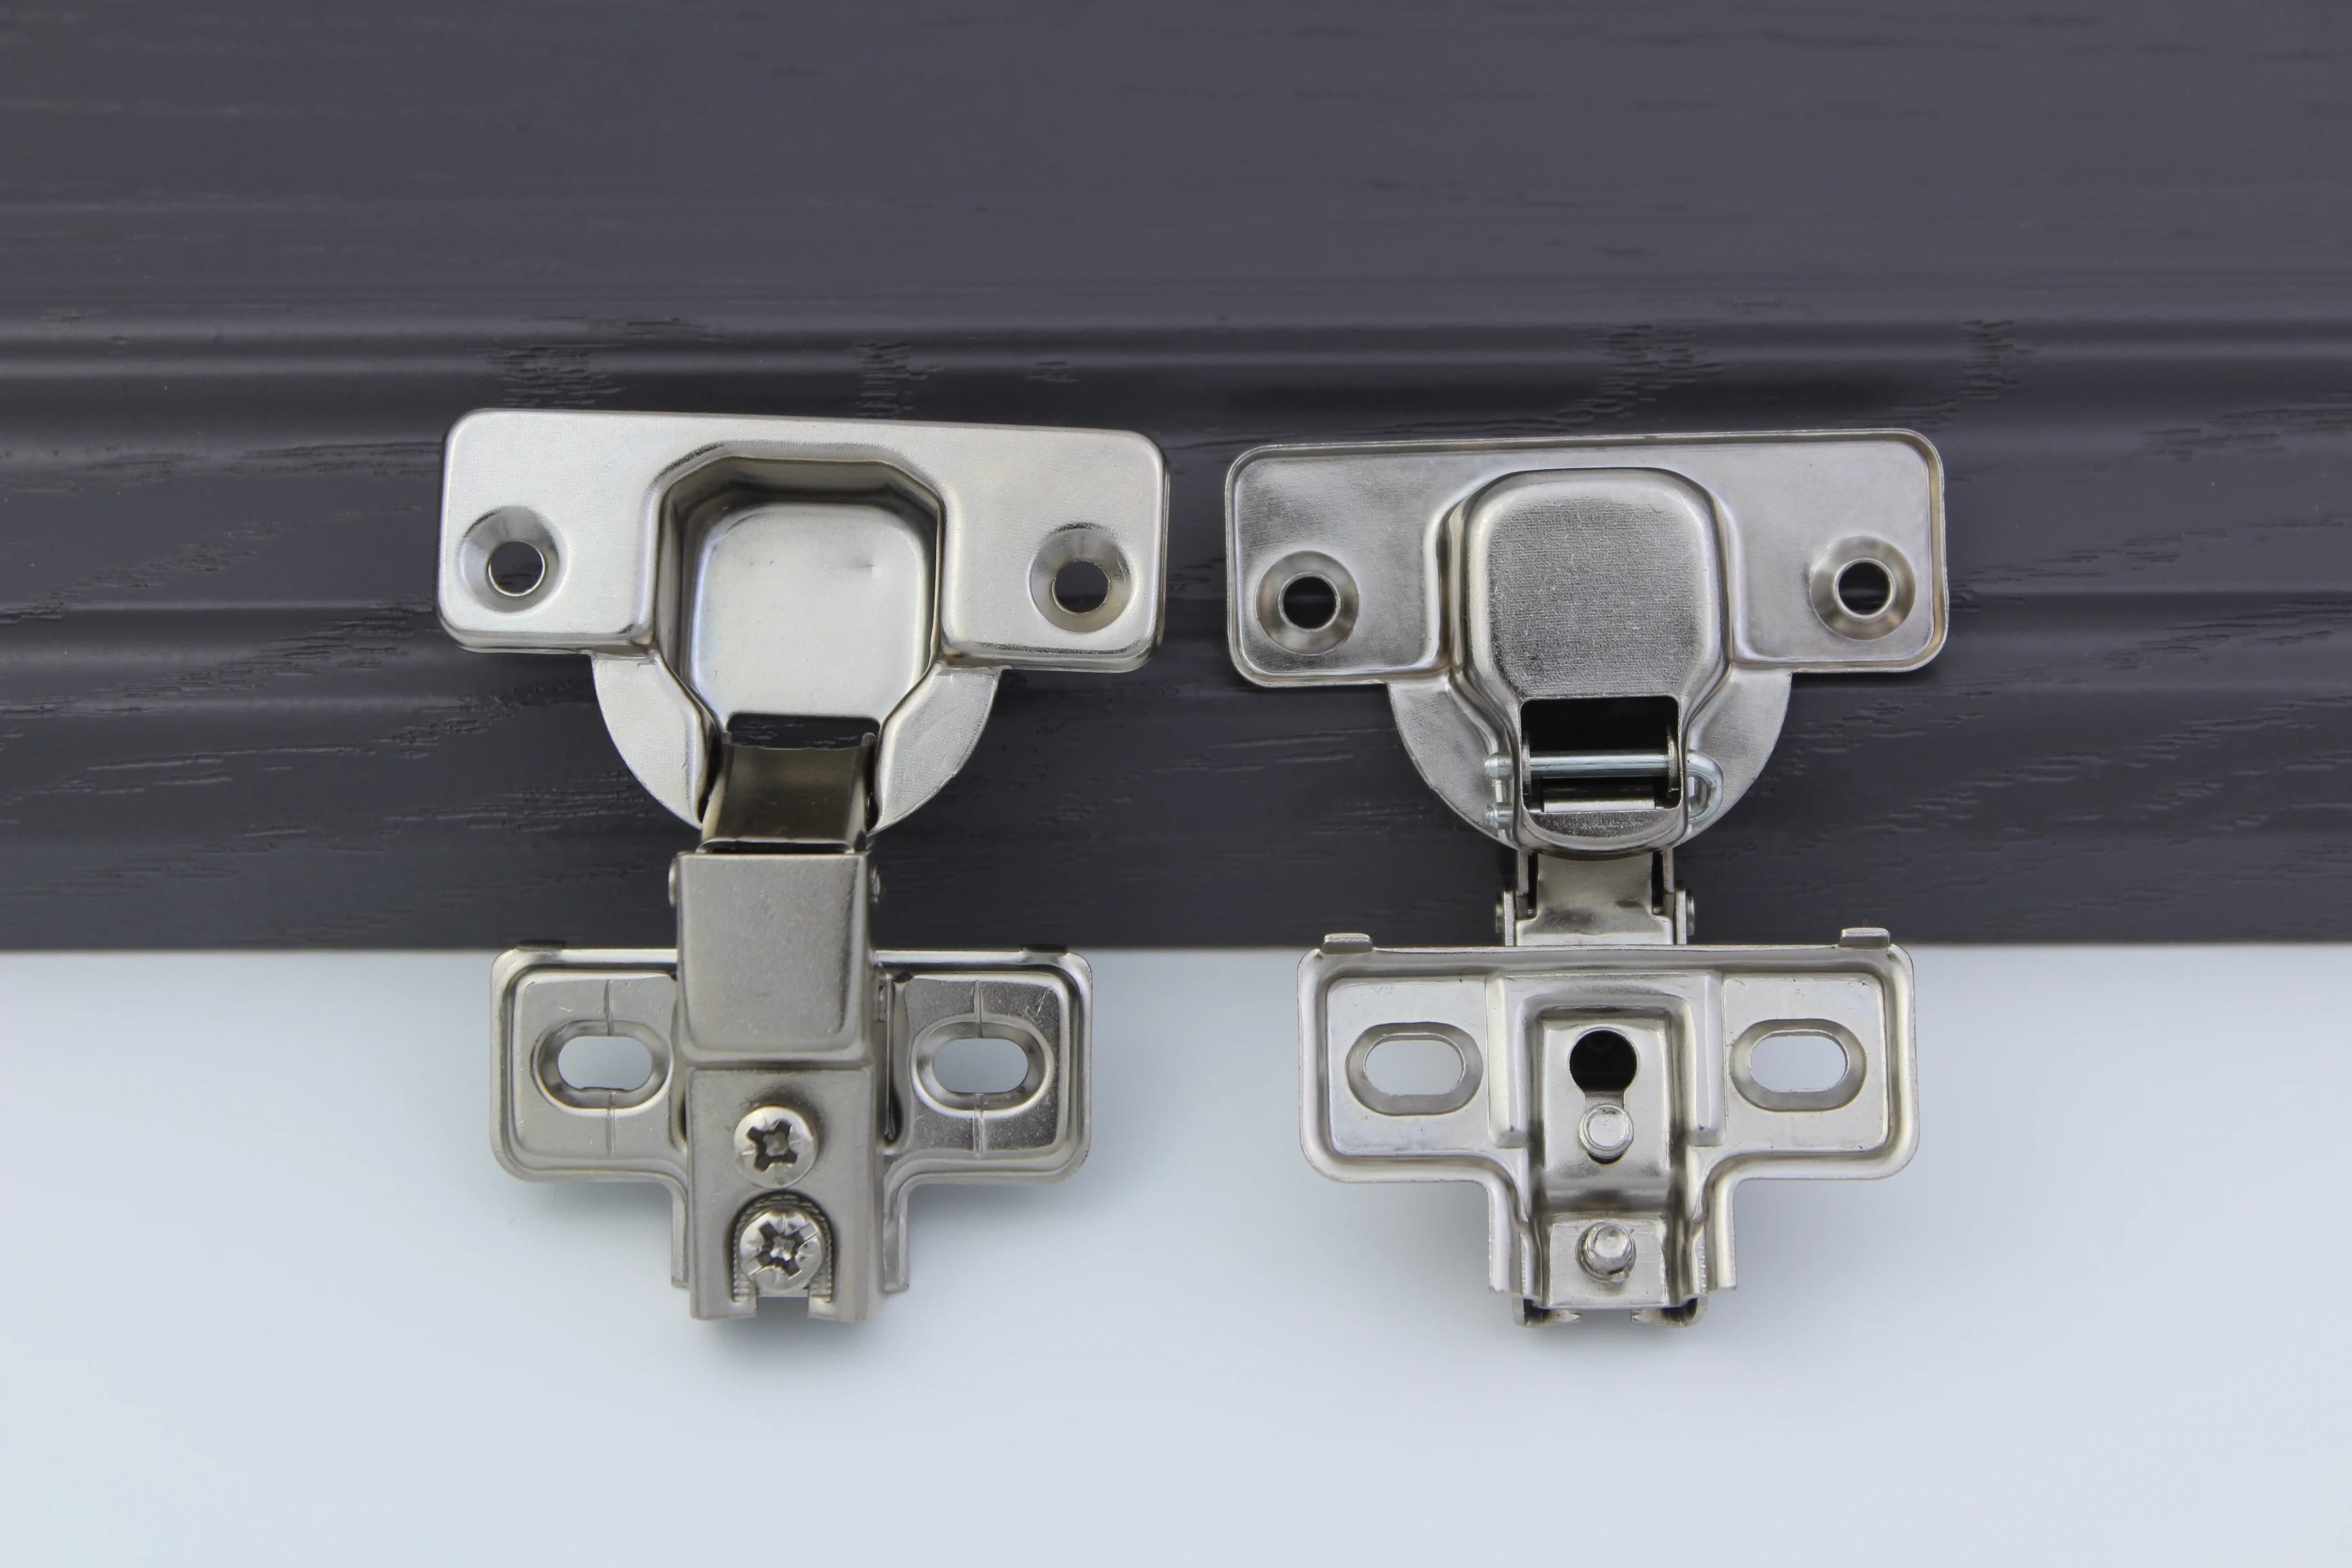 Two hole plate short arms kitchen cabinet hinges for furnitures